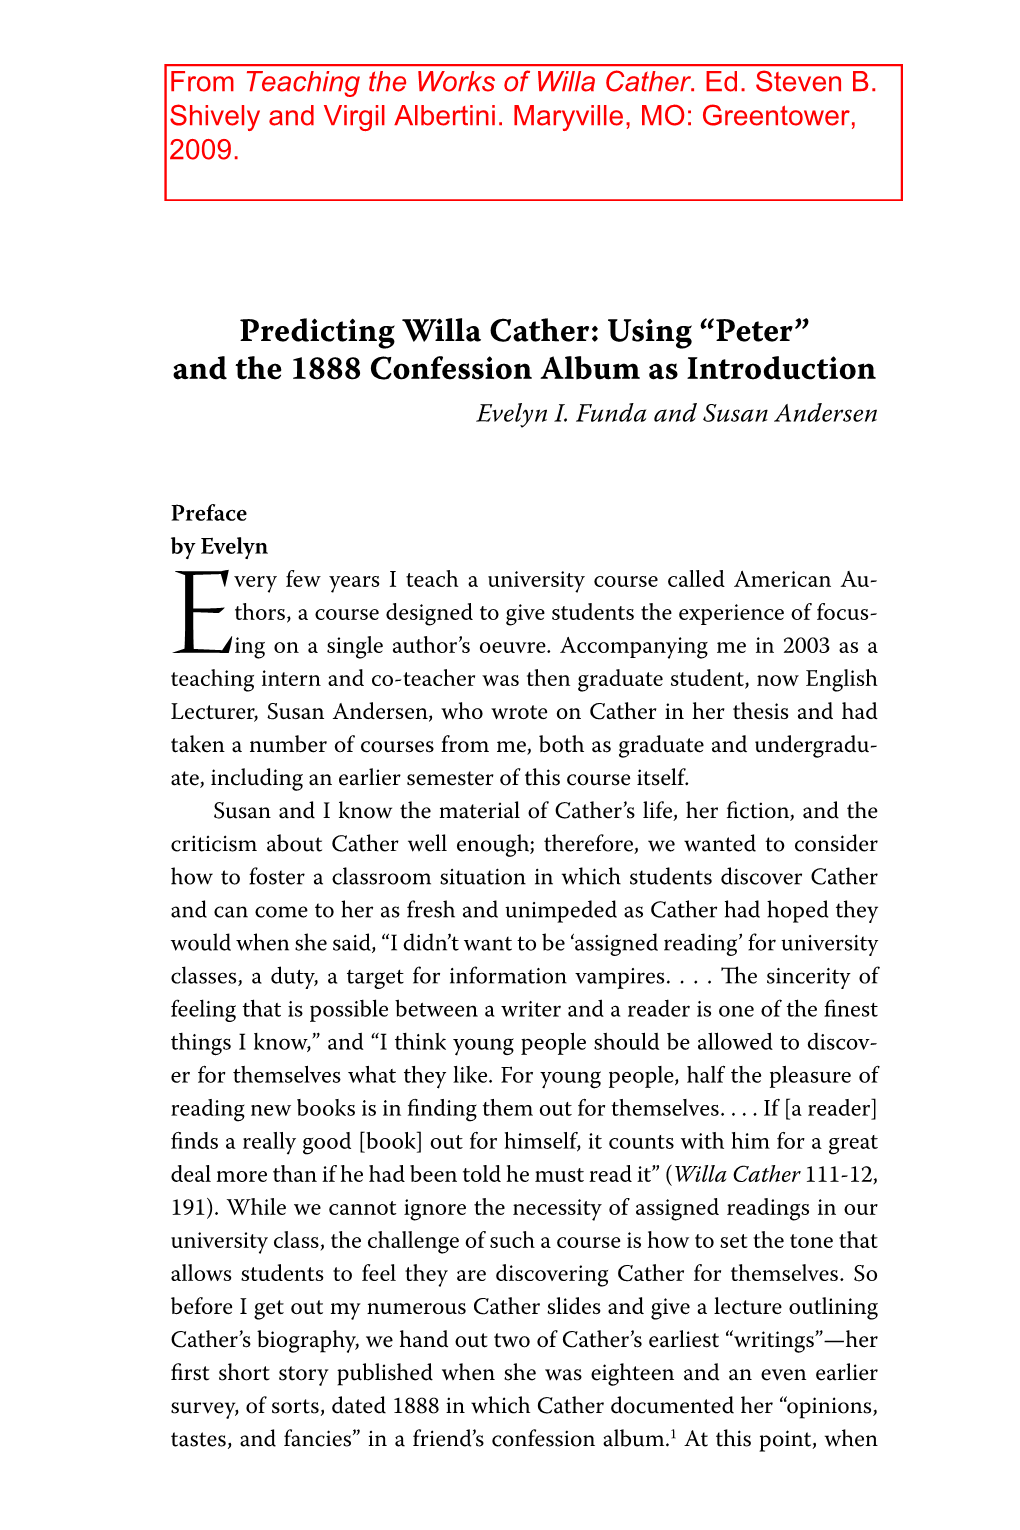 Predicting Willa Cather: Using “Peter” and the 1888 Confession Album As Introduction Evelyn I